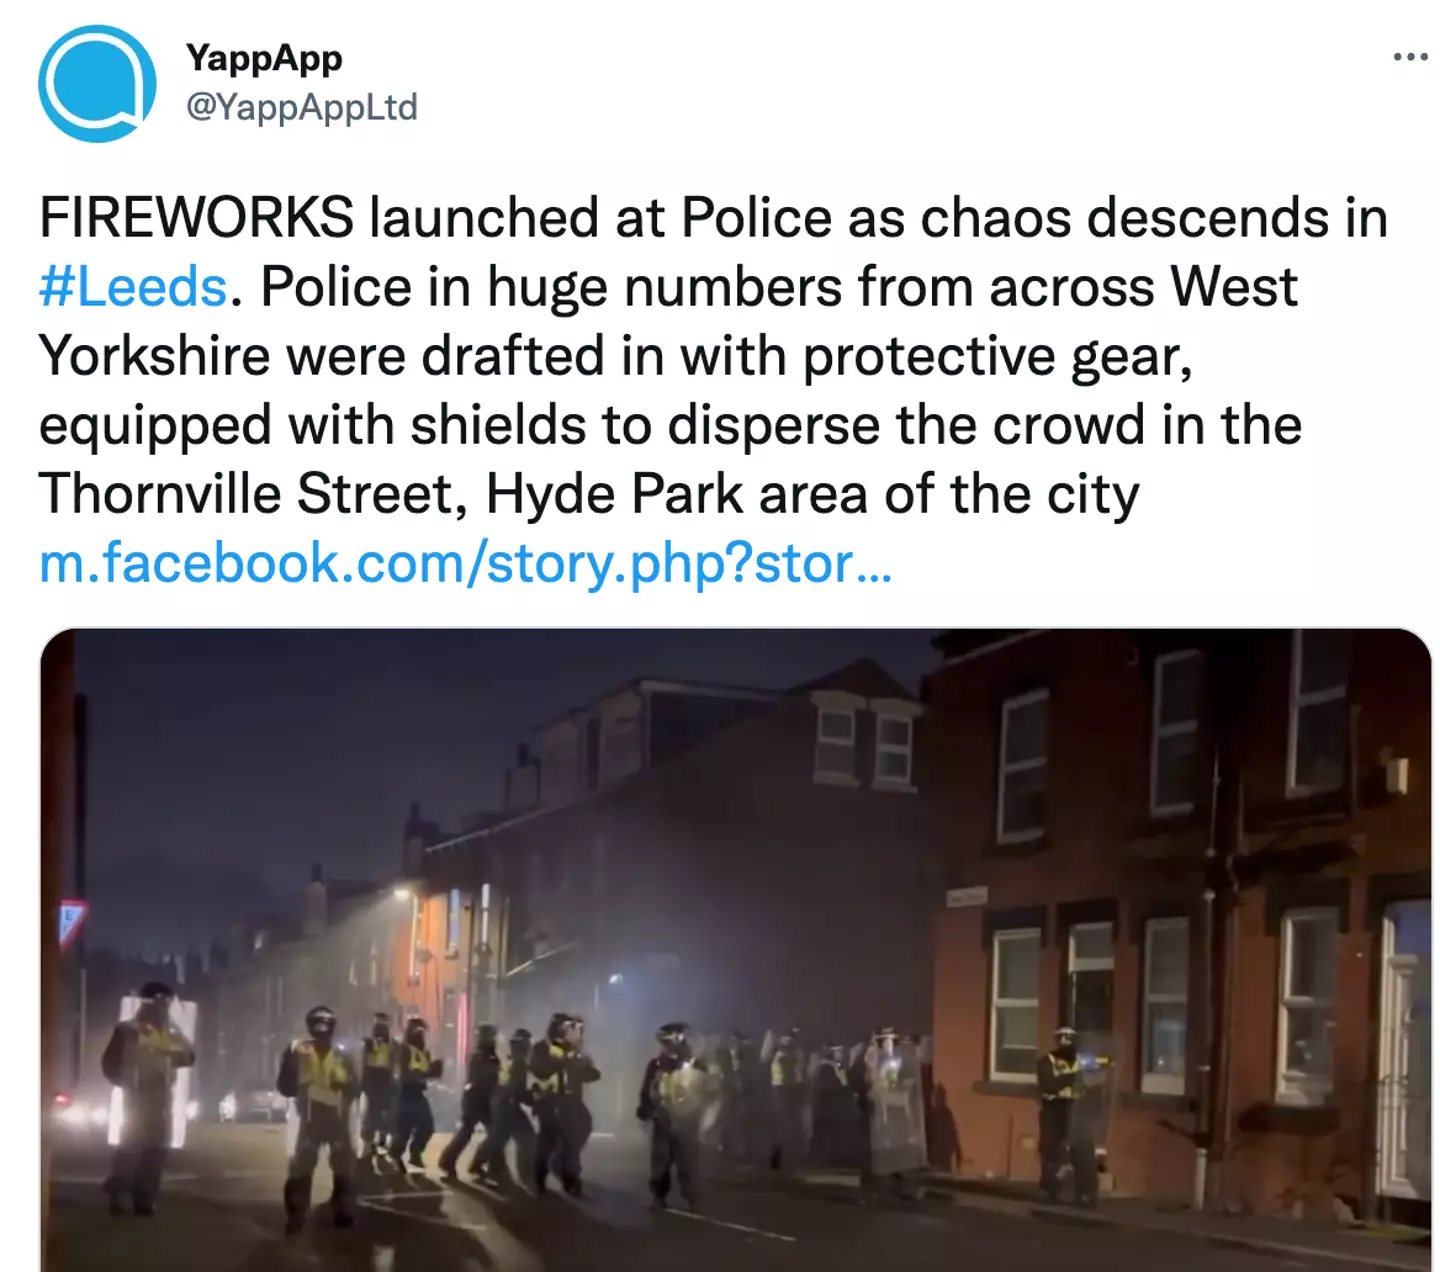 Fireworks were launched at police in Leeds.